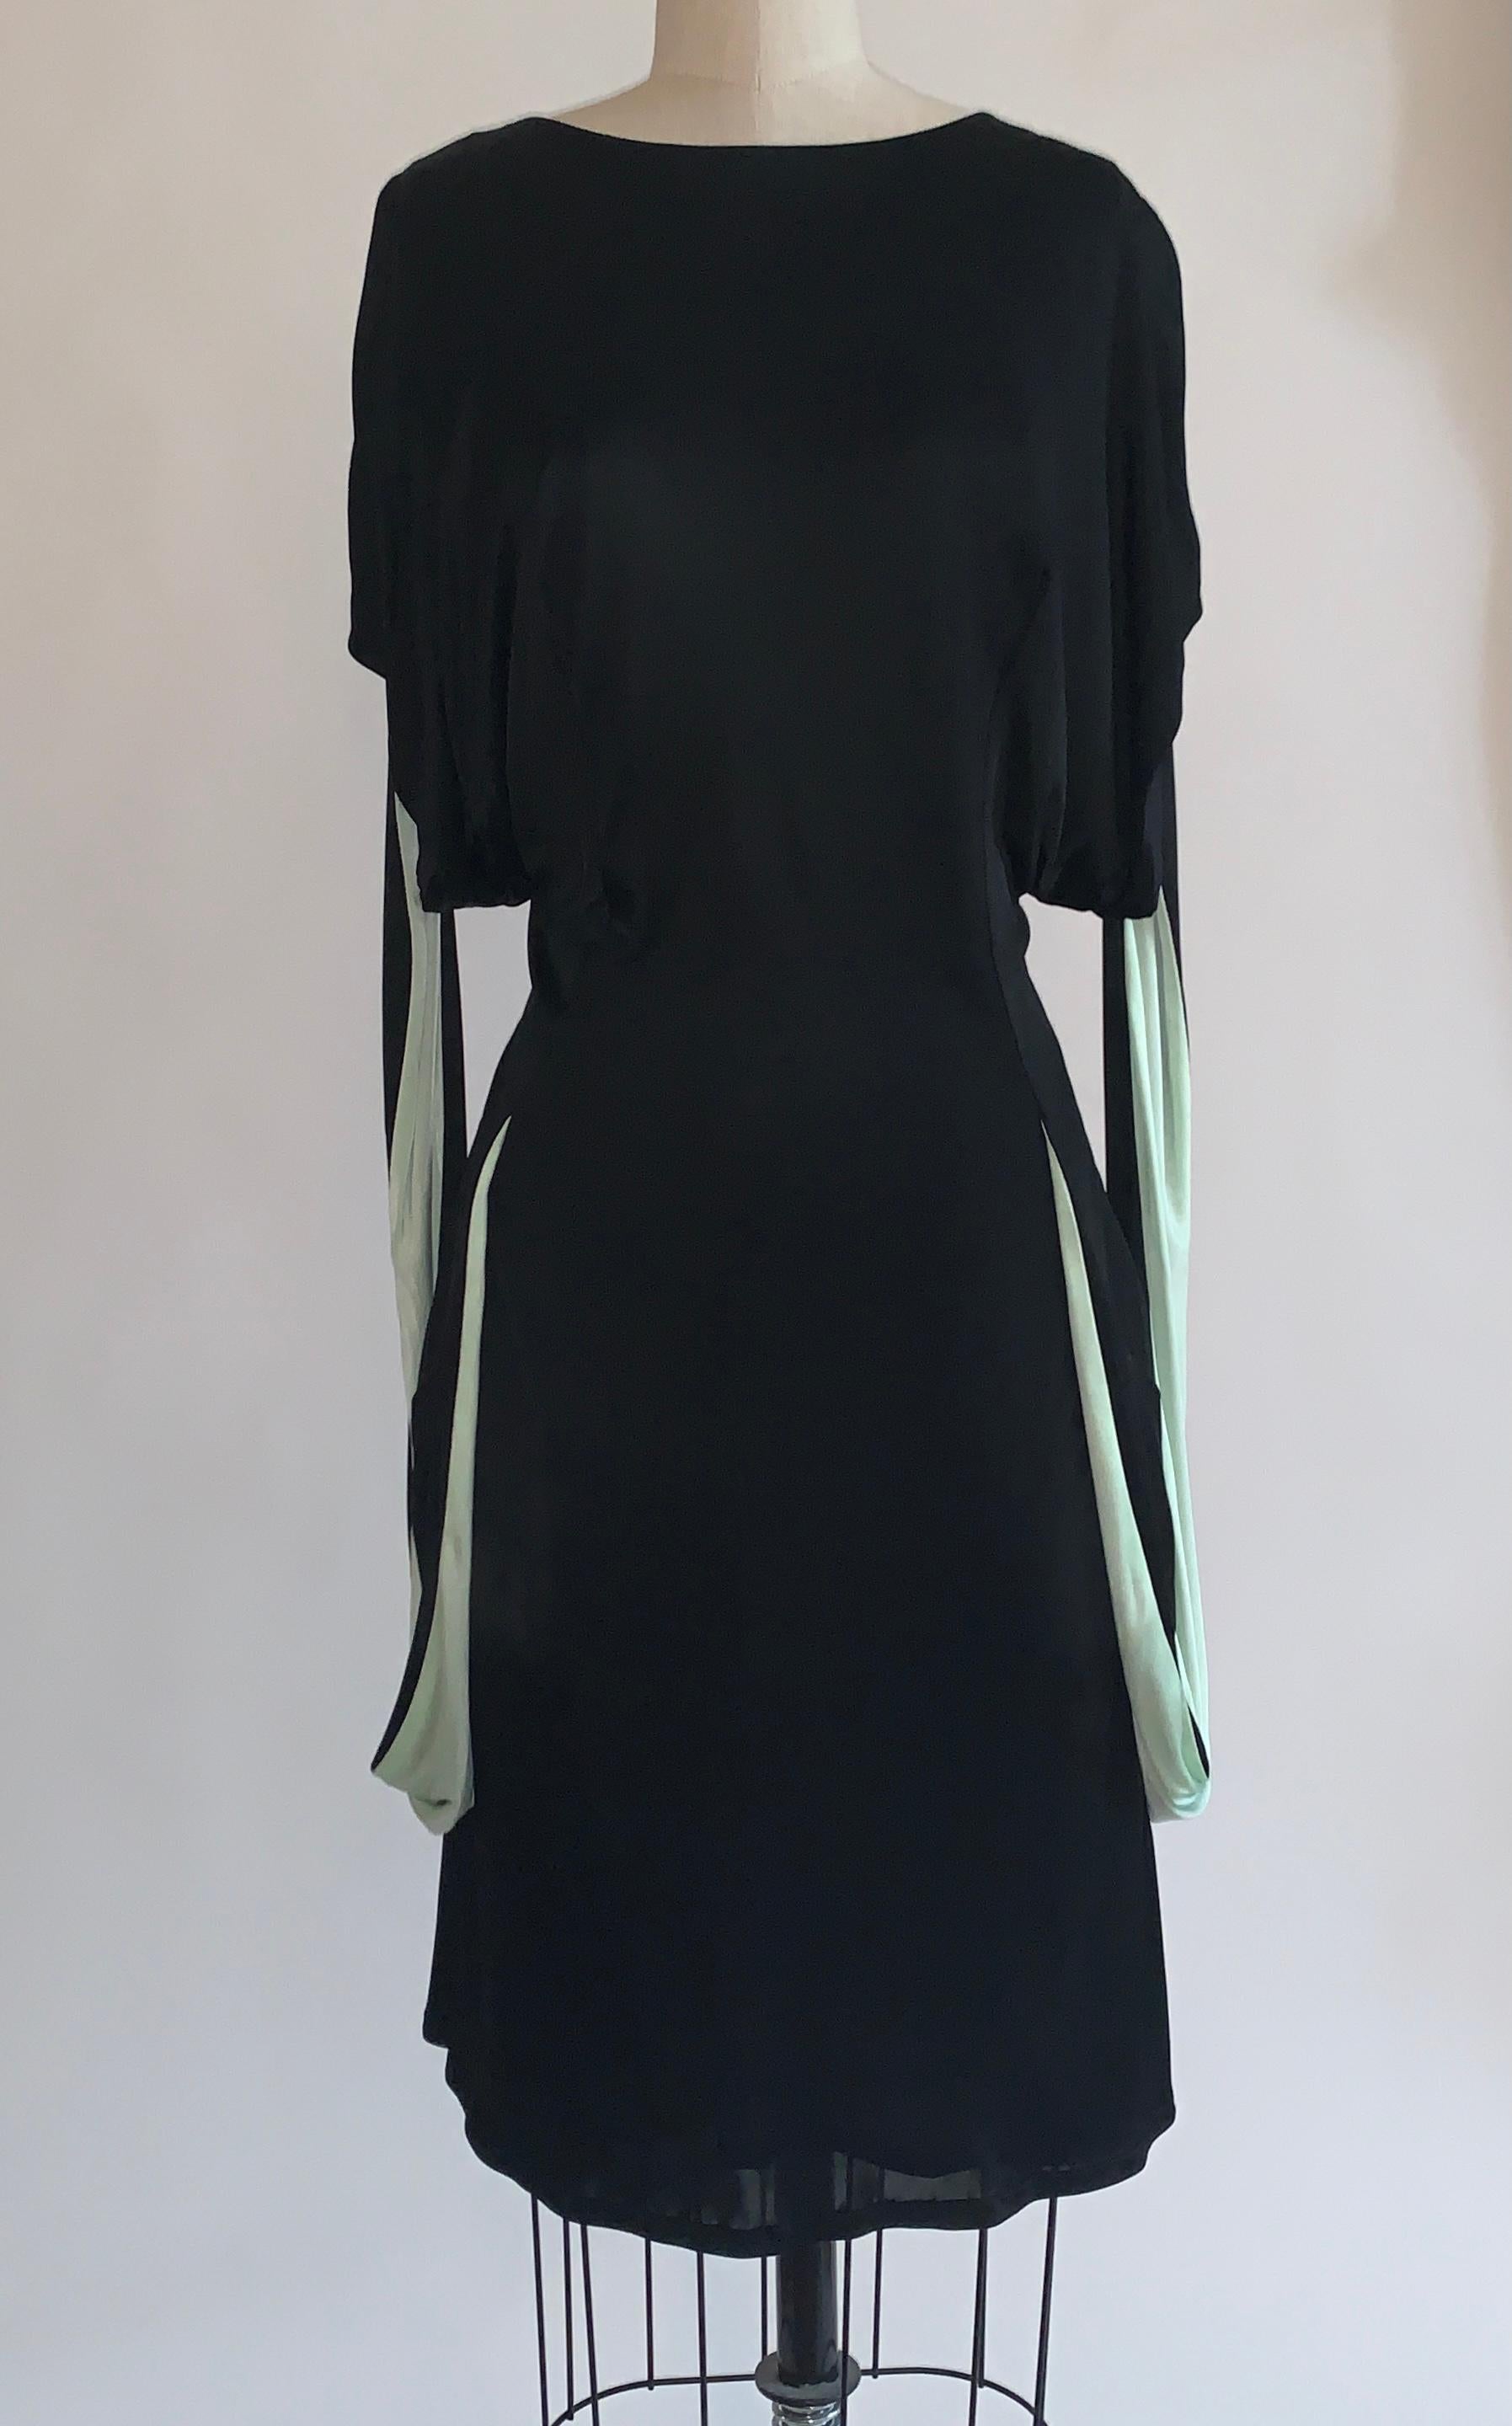 Alexander Mcqueen 2000s black draped jersey dress with amazing pale blue-green strap detail that hangs from sleeve to bottom and reconnects at hip seams. Side zip. 

100% rayon.
Lined in 75% polyamide, 25% lycra.

Made in Italy.

Size IT 42,